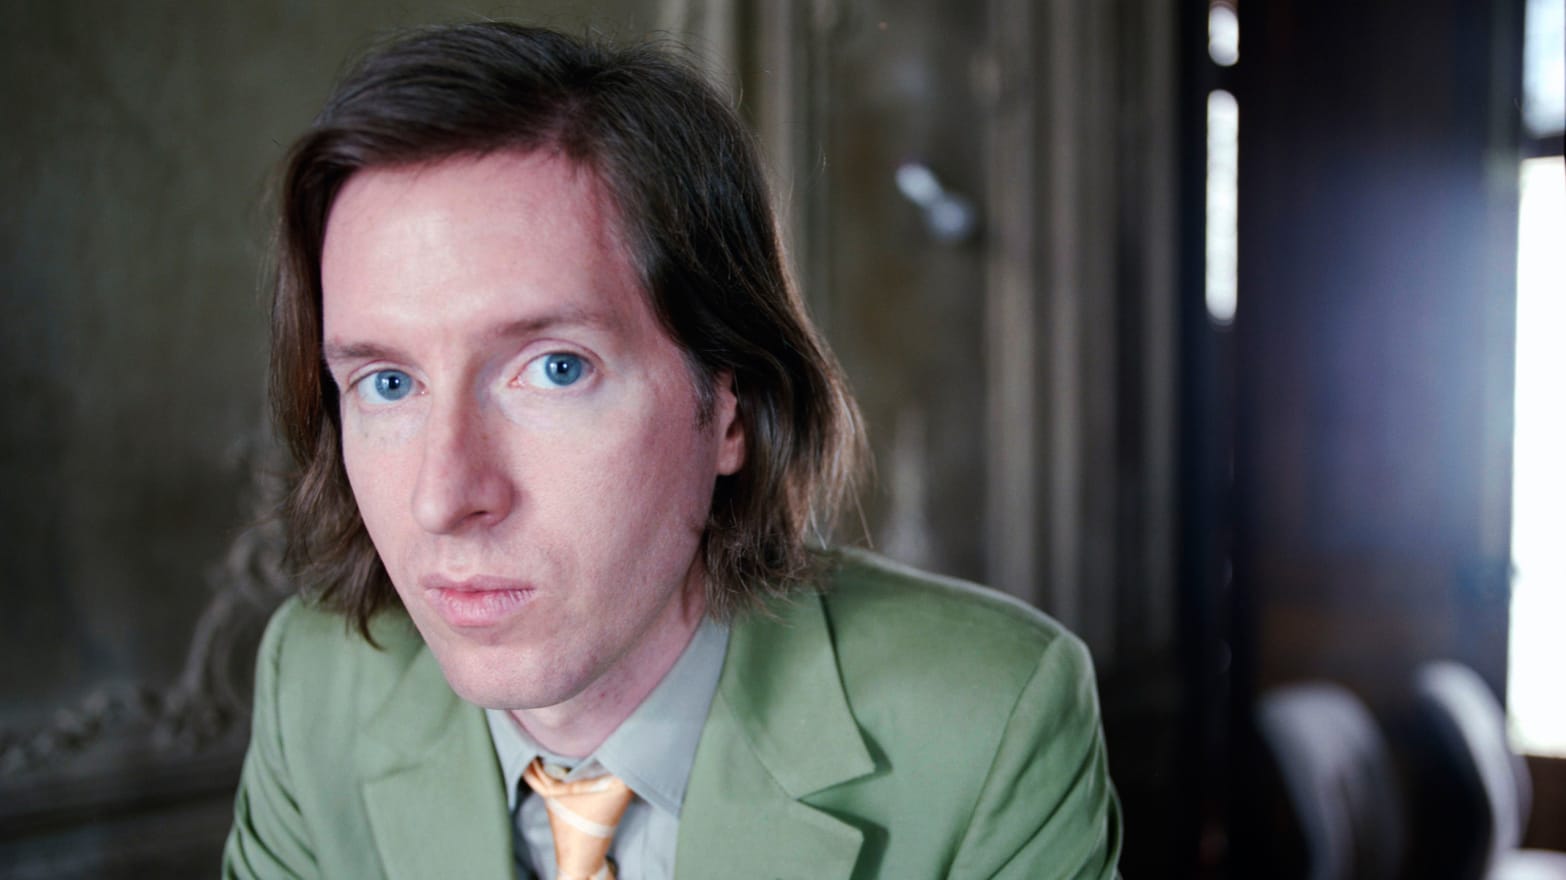 Wes Anderson wearing a green suit